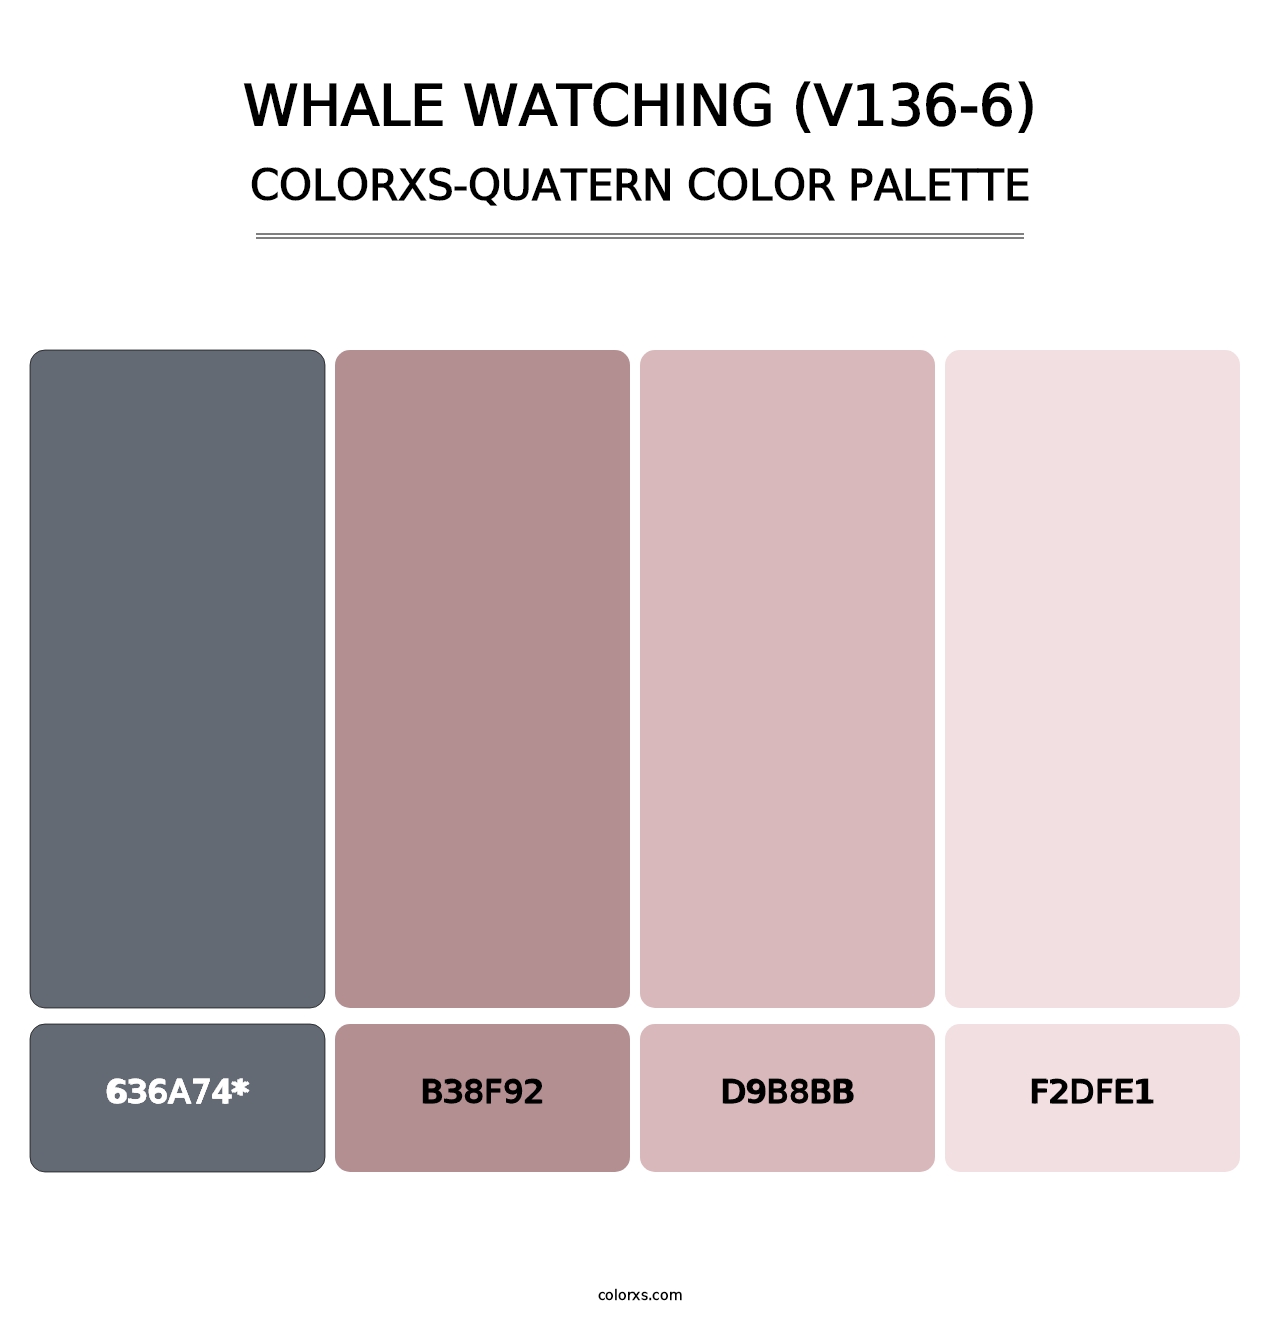 Whale Watching (V136-6) - Colorxs Quatern Palette